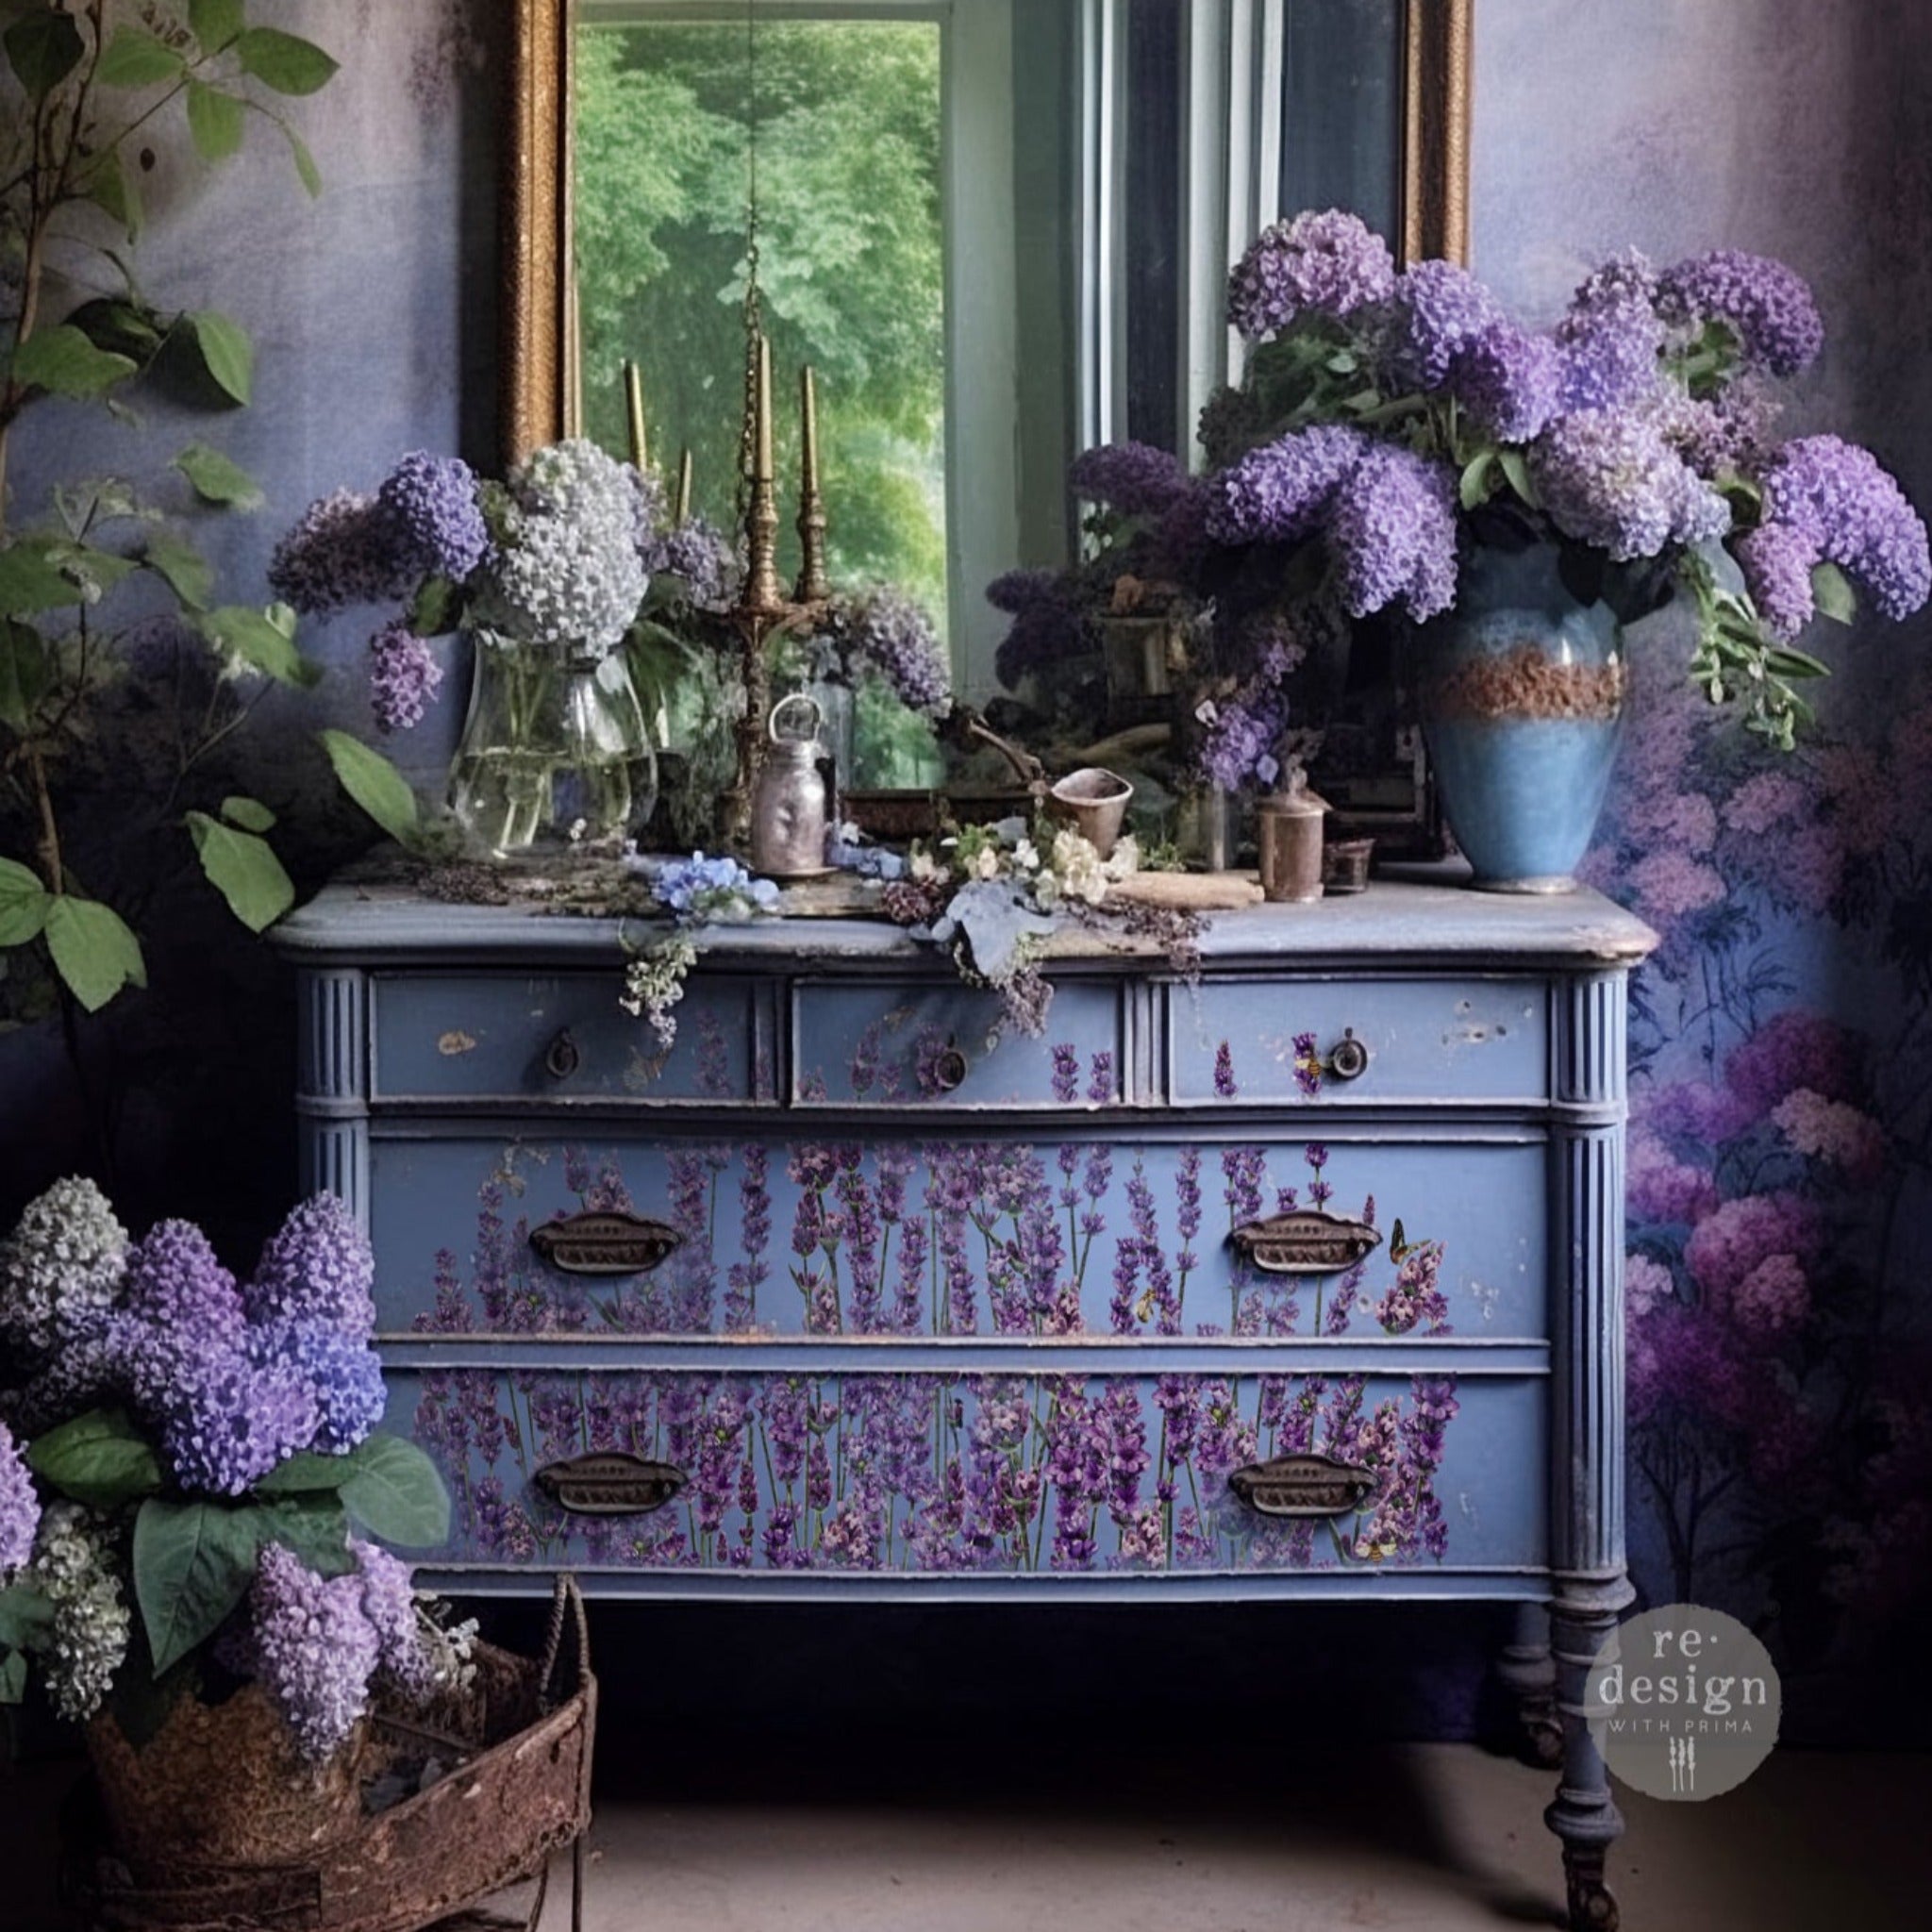 A vintage dresser is painted a soft blue and features ReDesign with Prima's Champs de Lavende transfer on it.